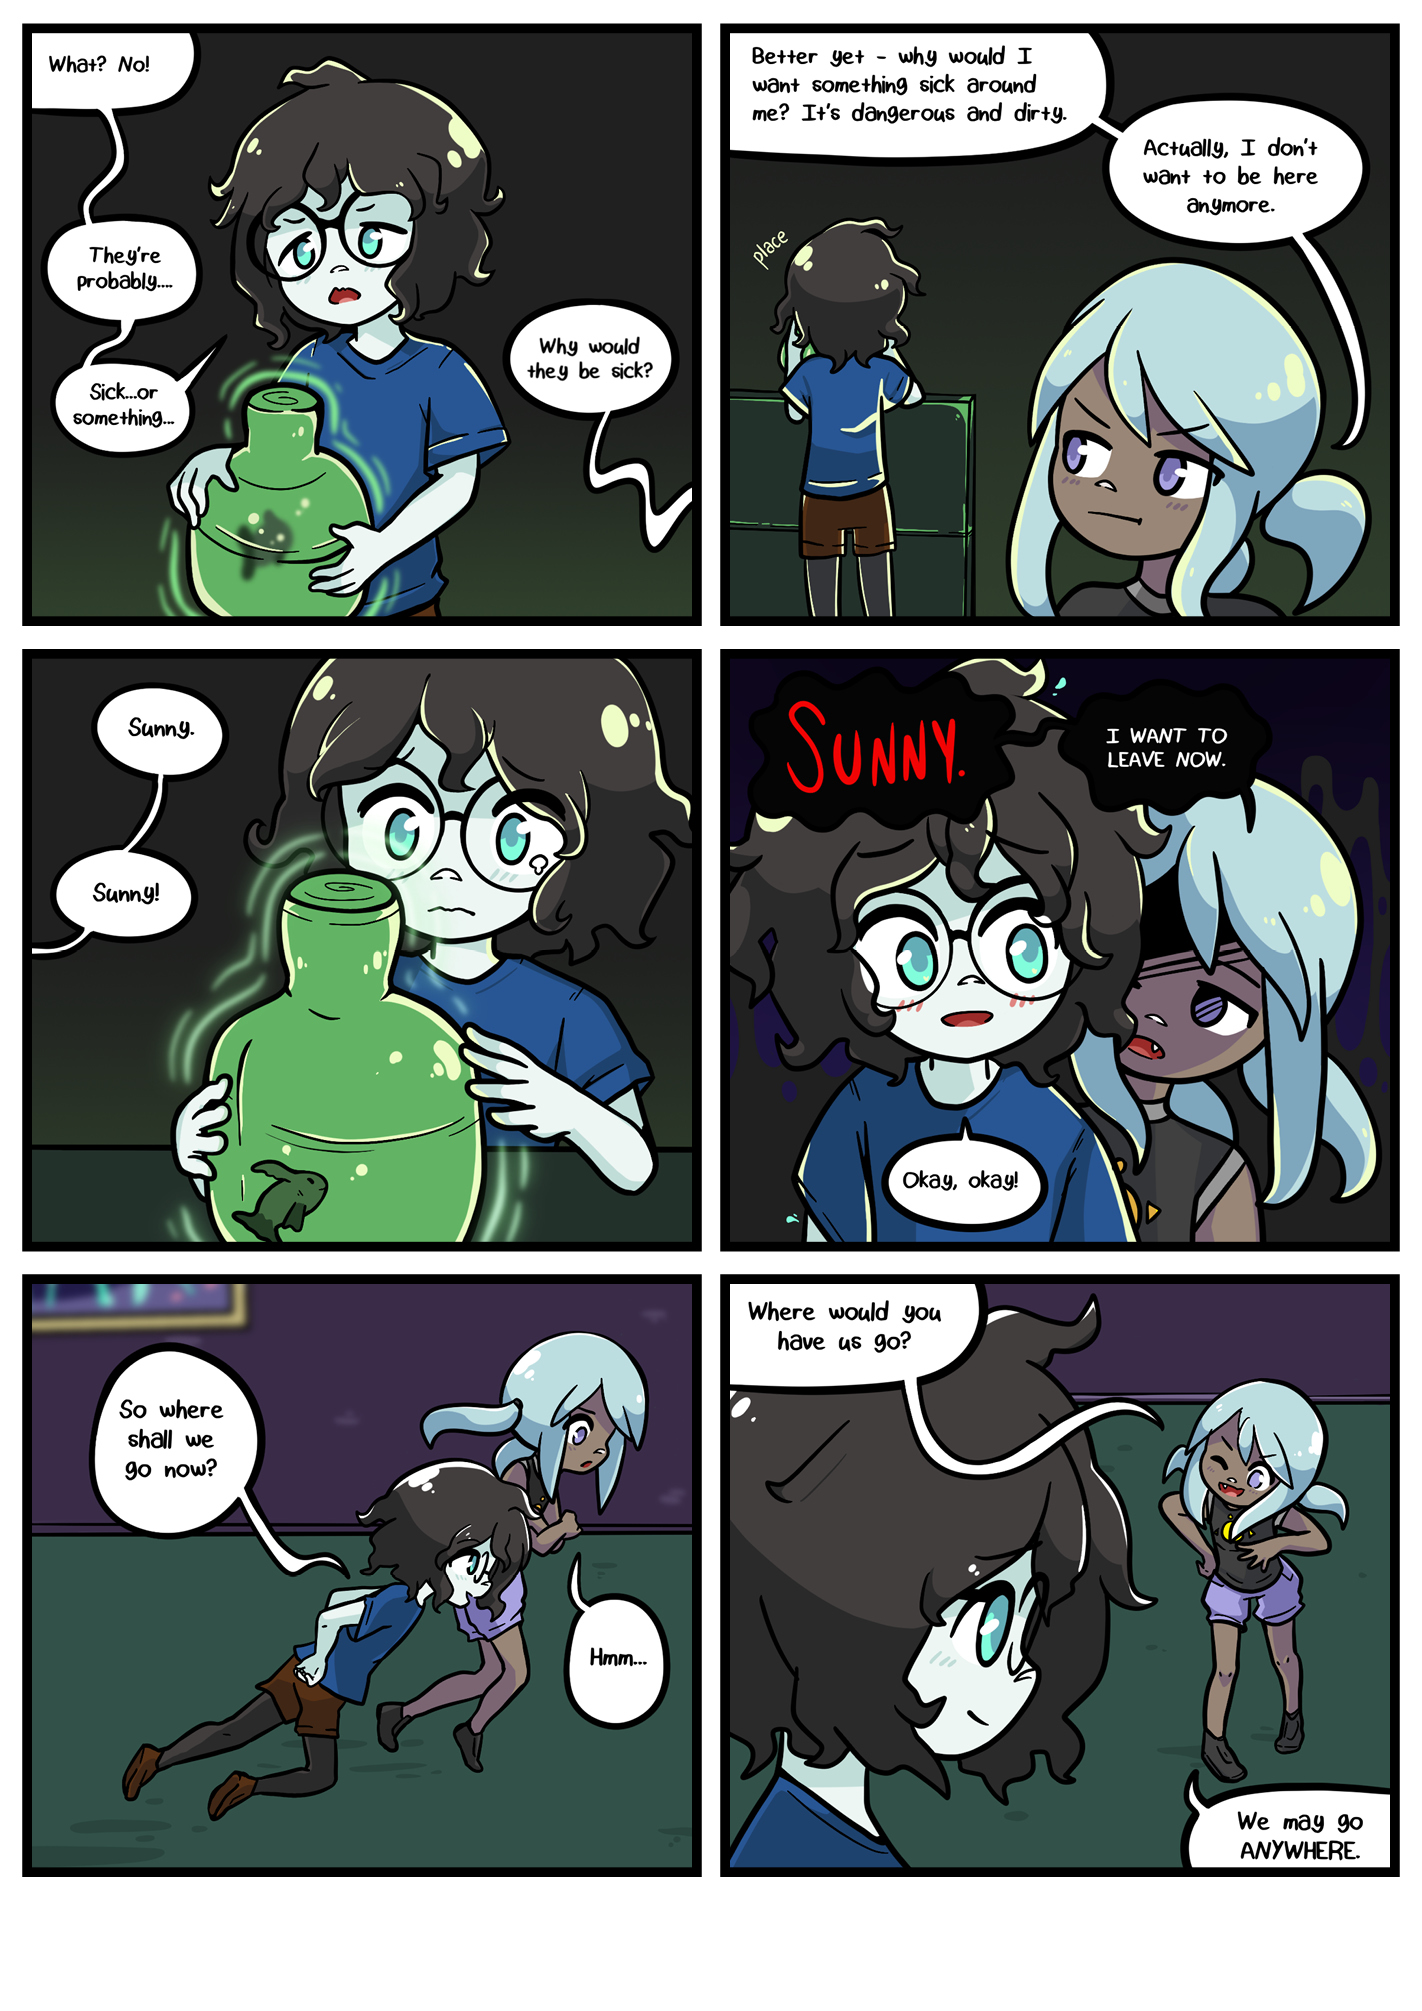 Seasick the underwater adventure comic, chapter 2 page 59 full updated